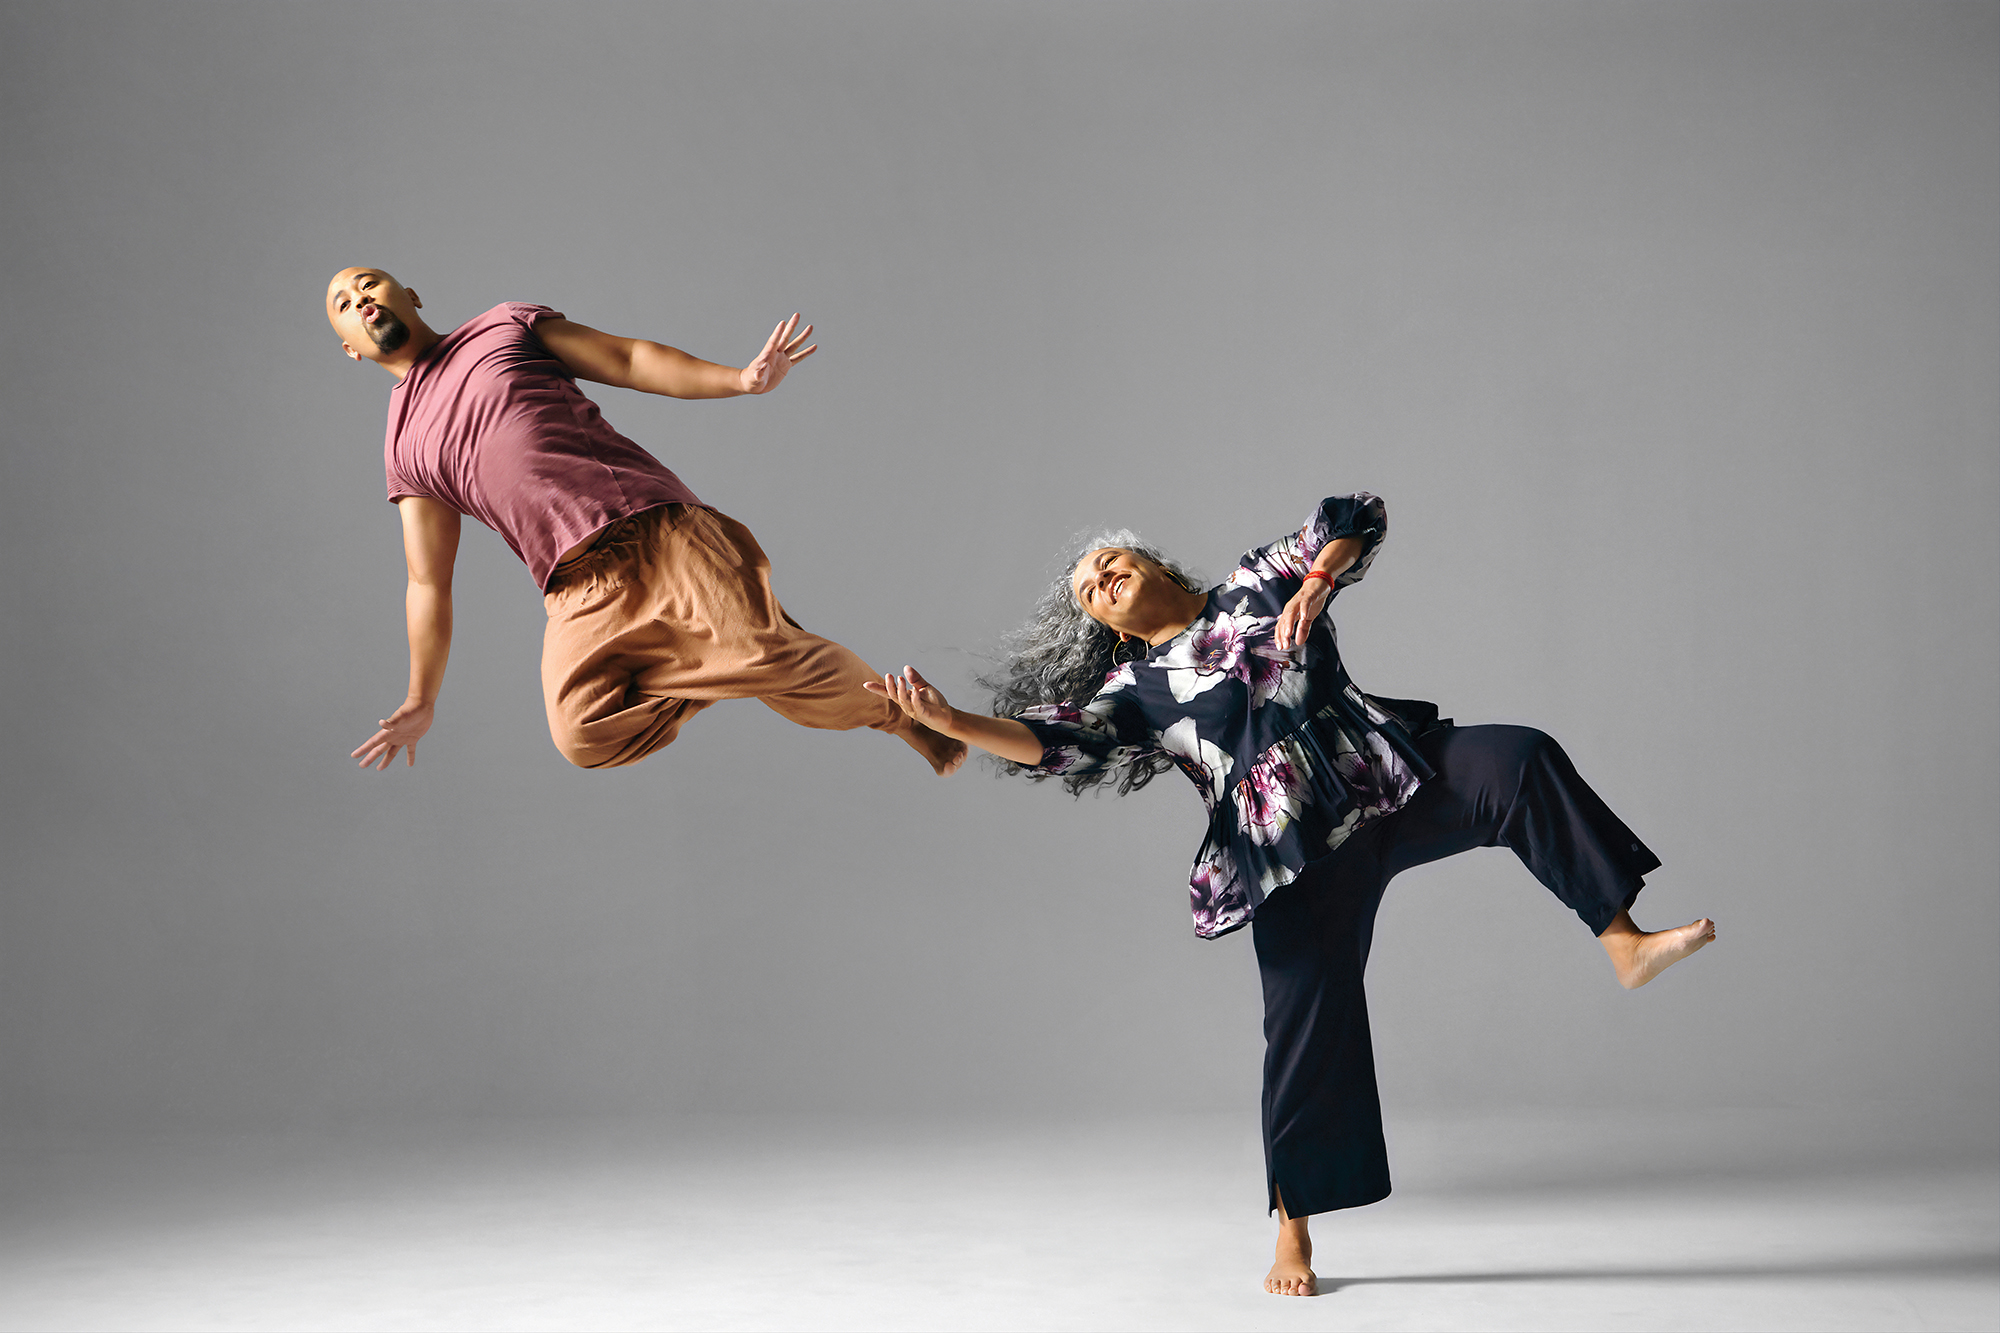 Alumnus Jason Galeos and faculty member Michèle Moss leap with characteristic joy.